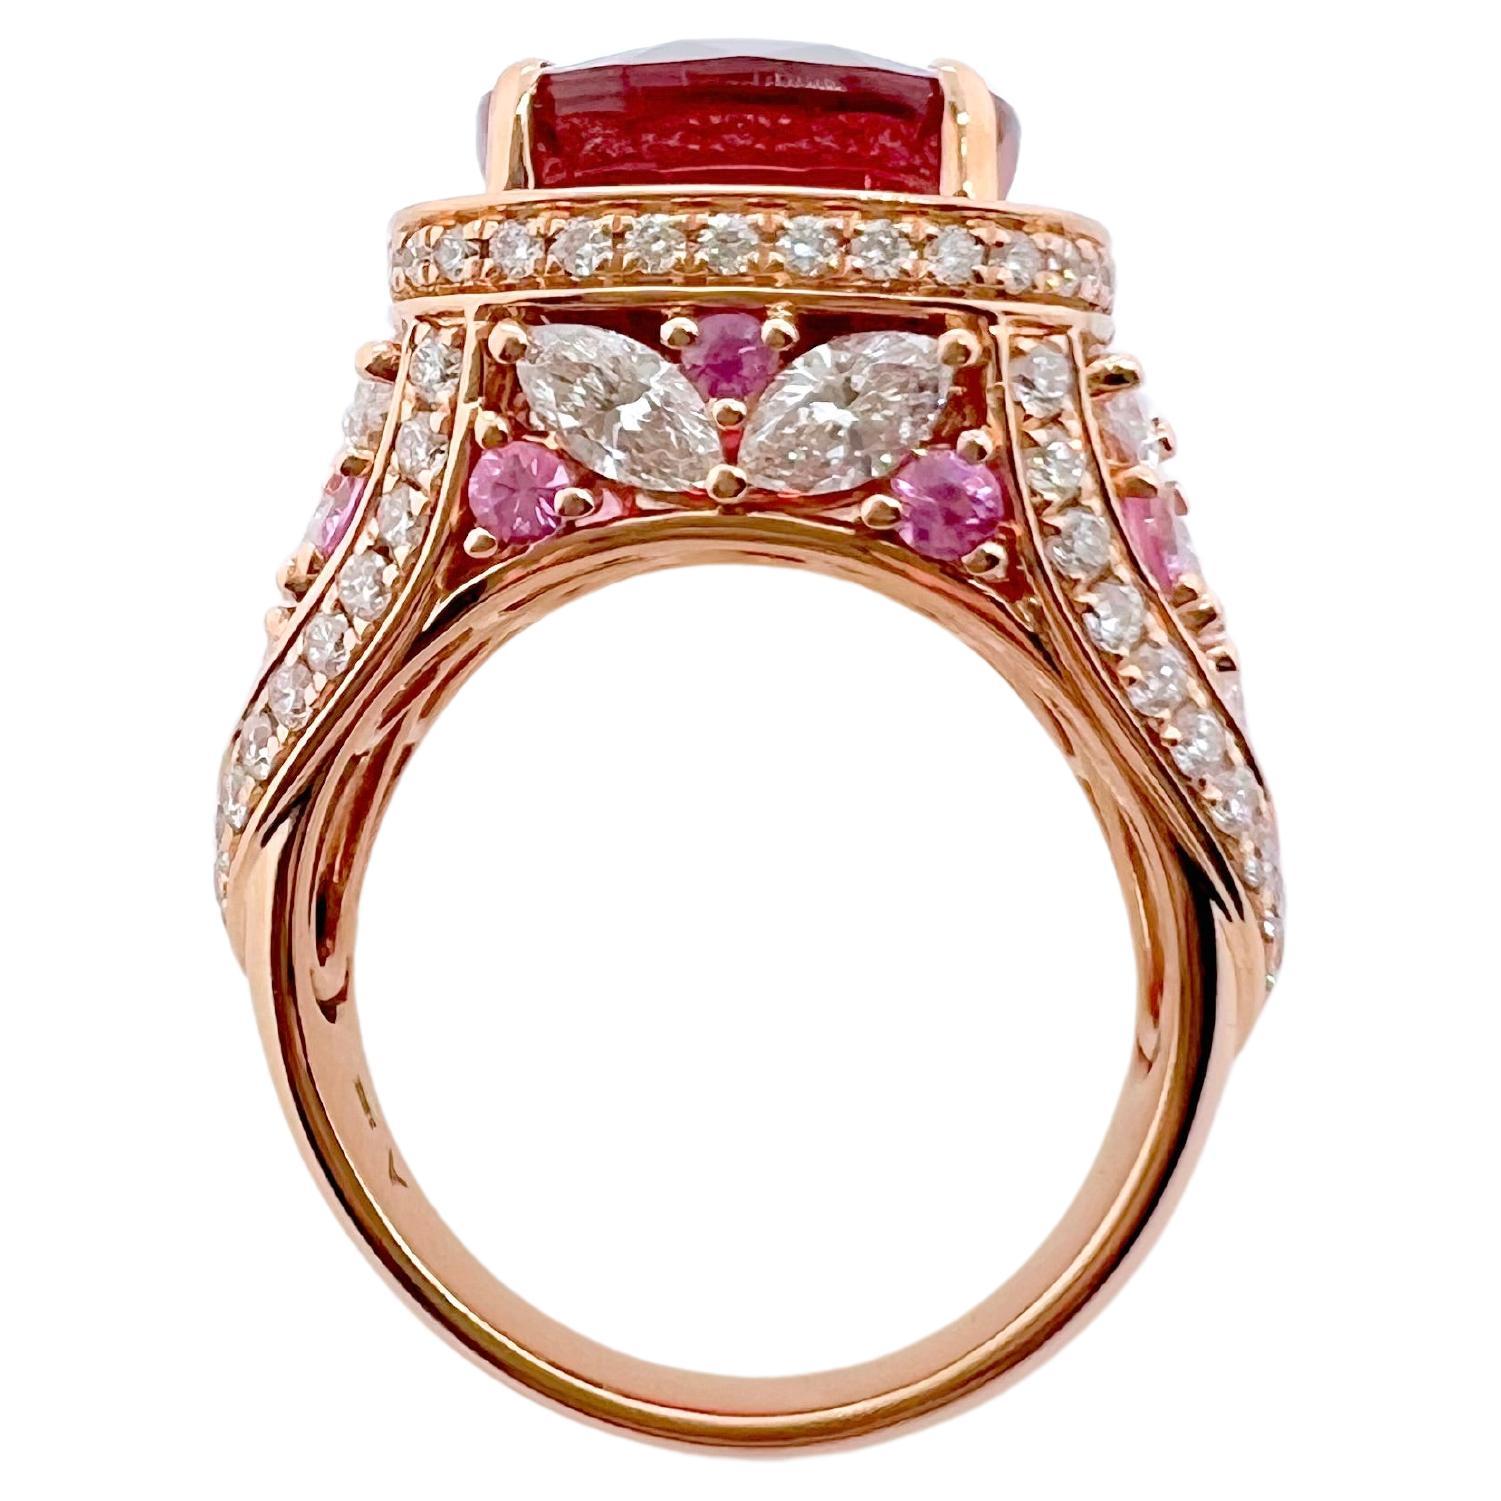 Oval Cut 18k Rose Gold Rubellite with Pink Sapphires and Diamond Ring